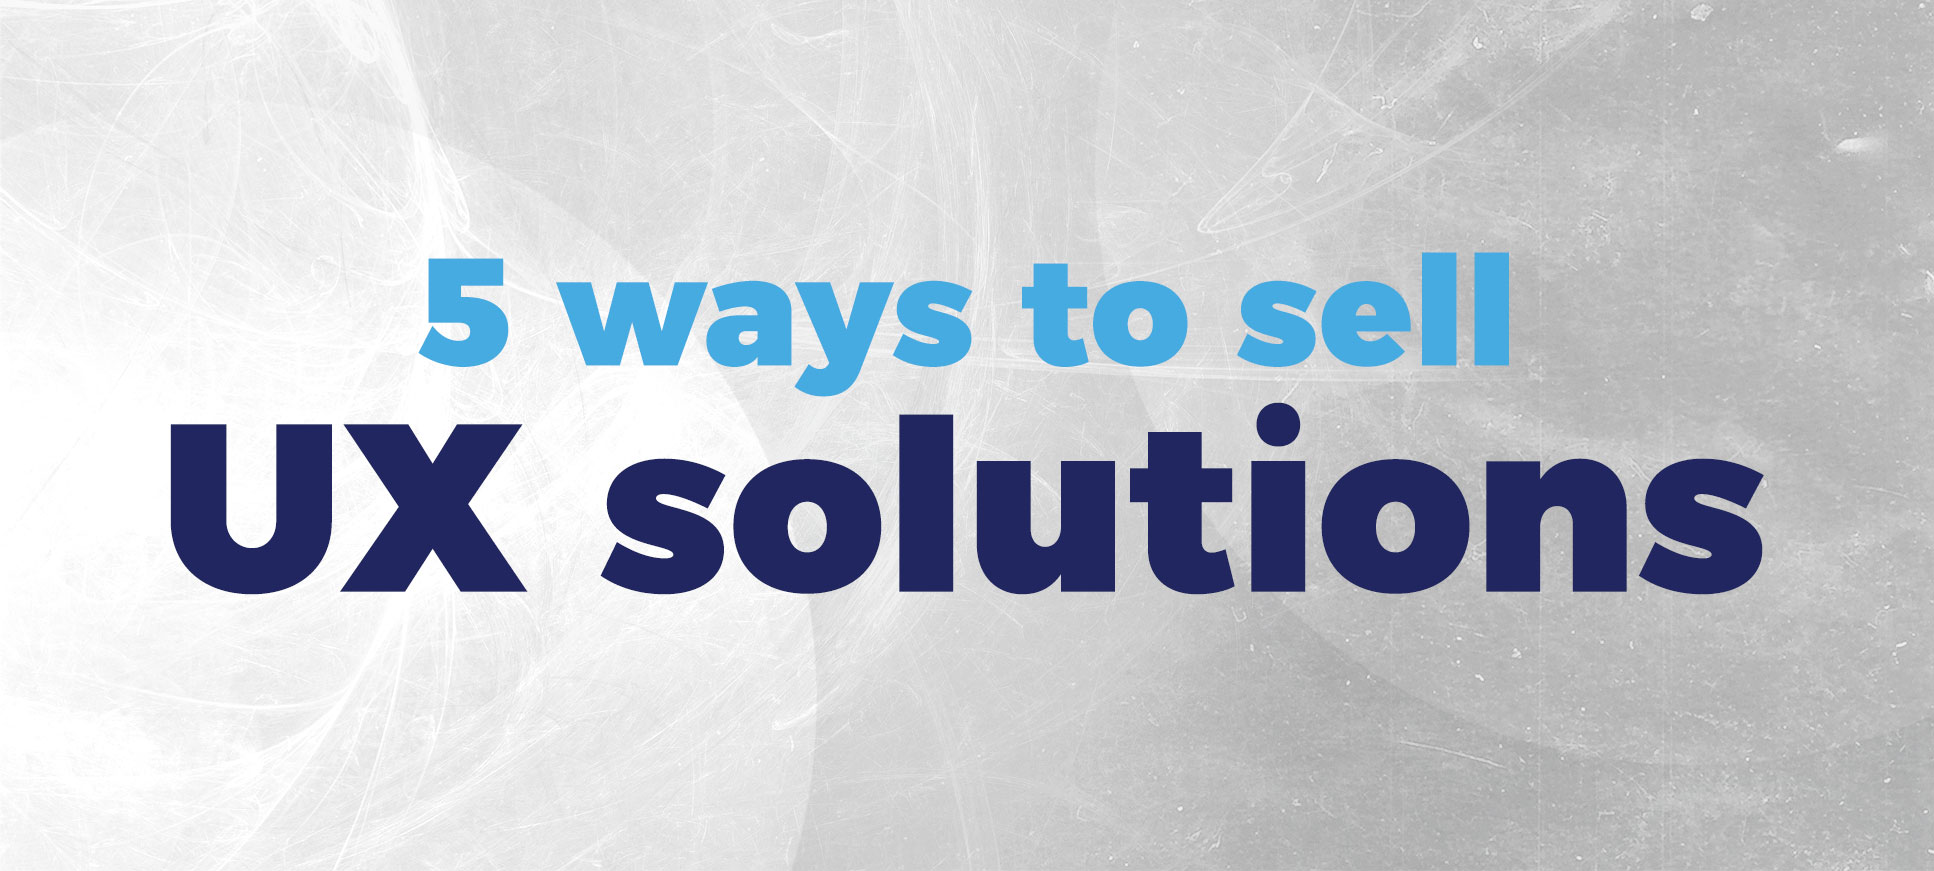 5 ways to sell ux solutions